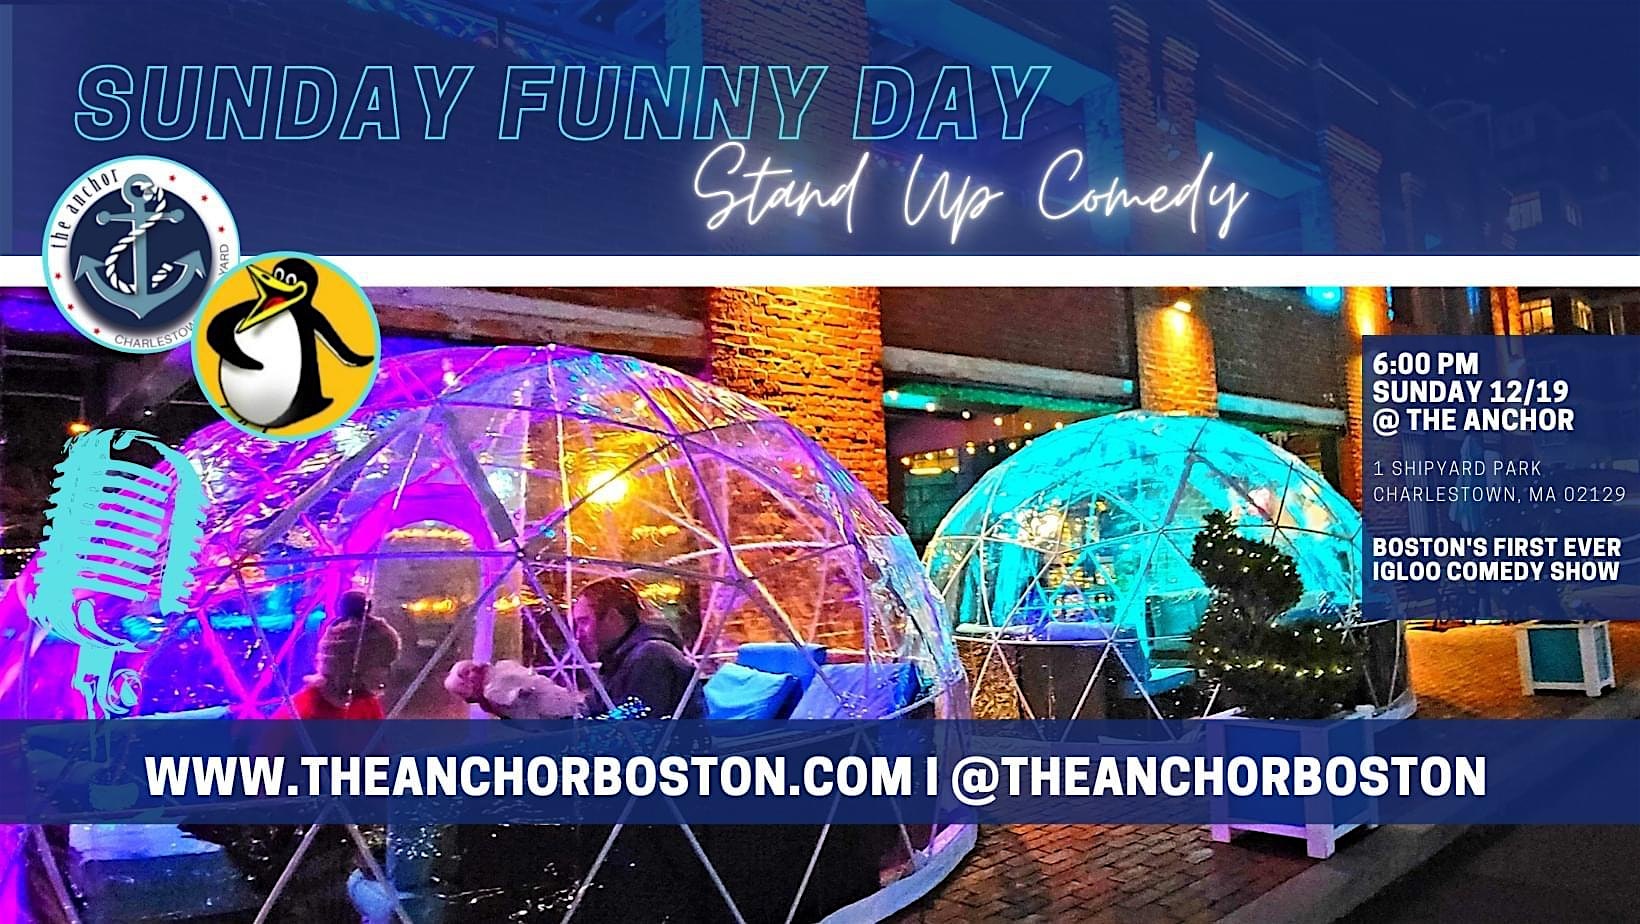 Sunday Funny Day: Stand-Up Comedy at The Anchor, Charlestown